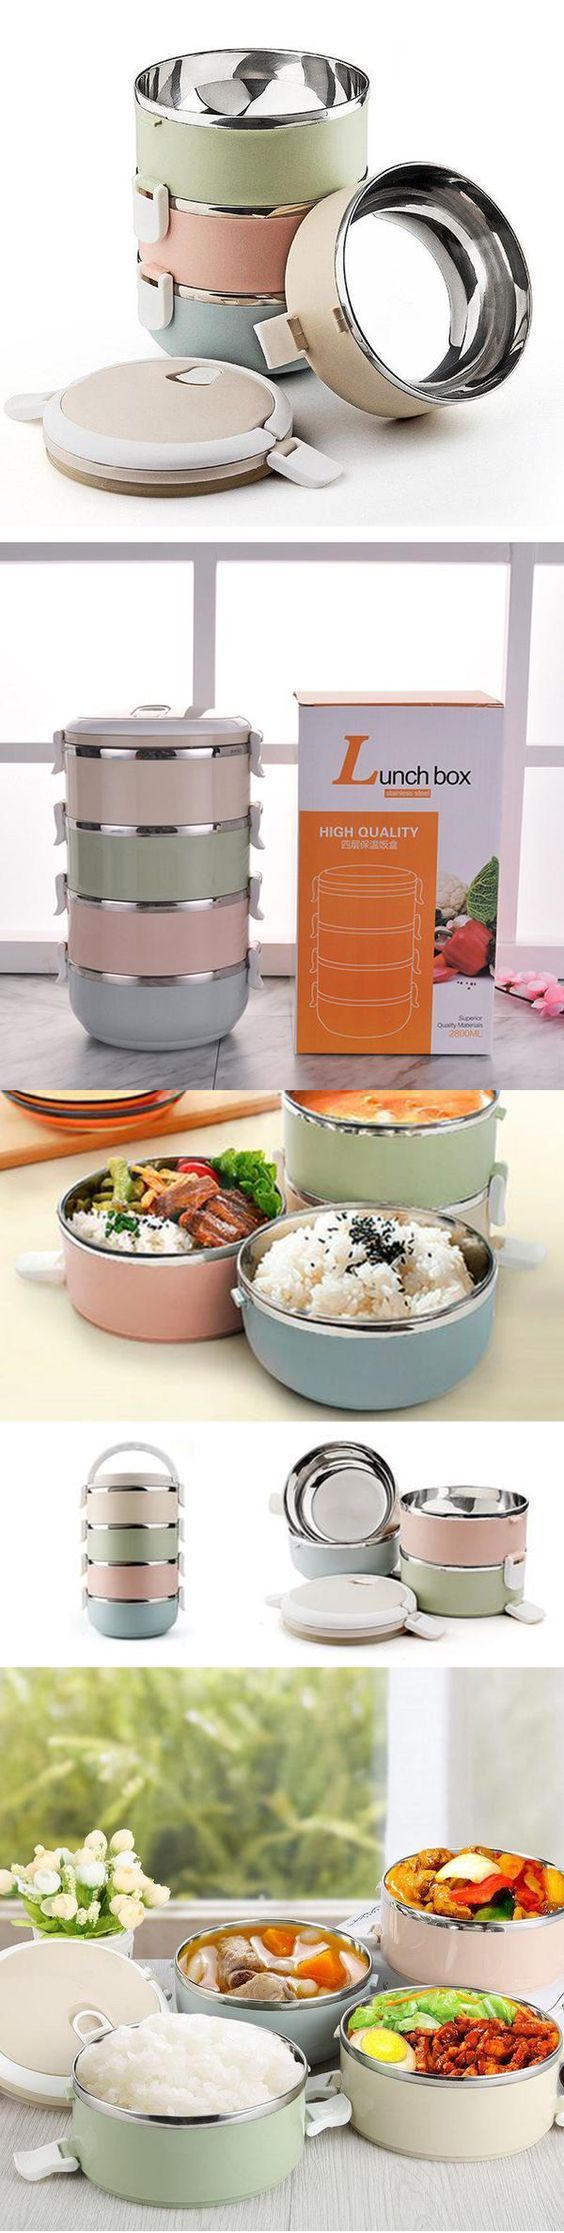 1000+ SOLD Lunch Box Bento Food Storage Container.1/2/3/4 Layers&Stainless Steel.SHOP NOW! -   21 bathroom decor storage
 ideas